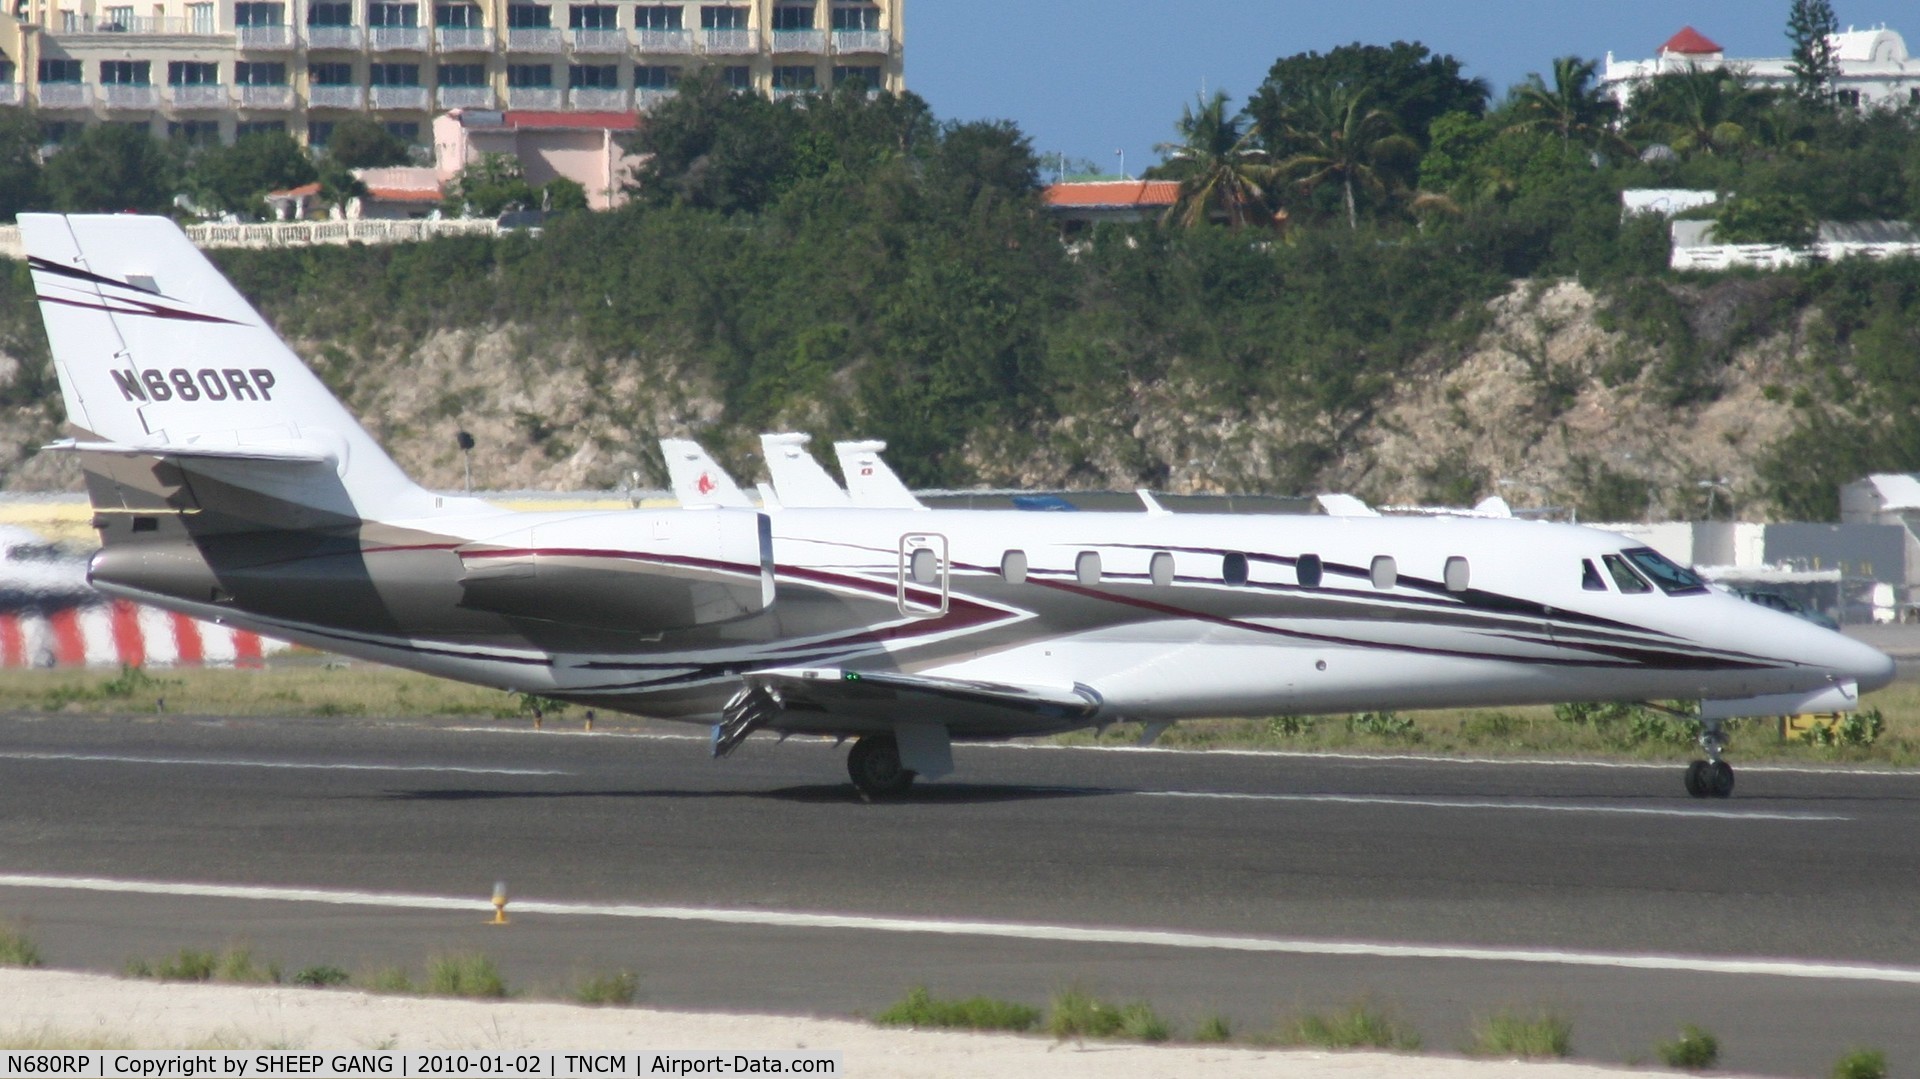 N680RP, 2008 Cessna 680 Citation Sovereign C/N 680-0239, N680RP just landed at TNCM and back tracking the active for parking